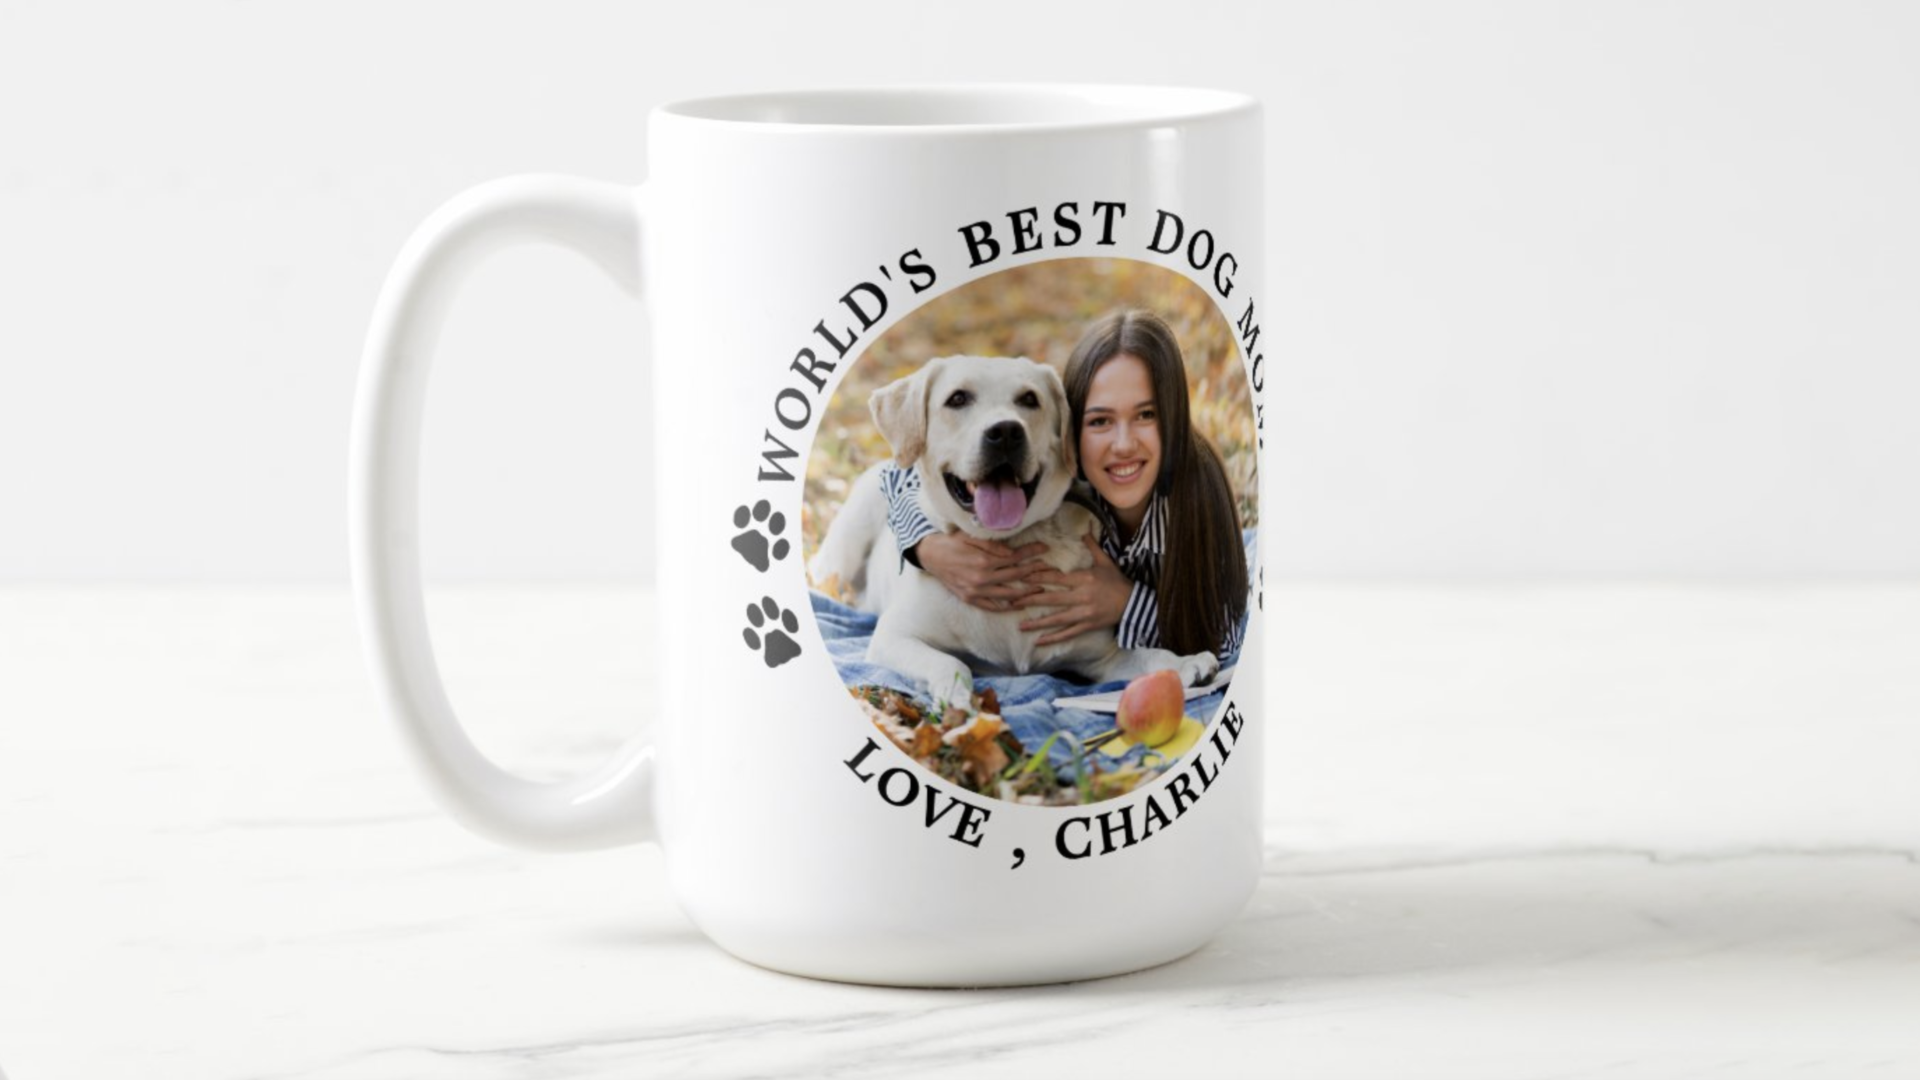 Dog and person on coffee cup